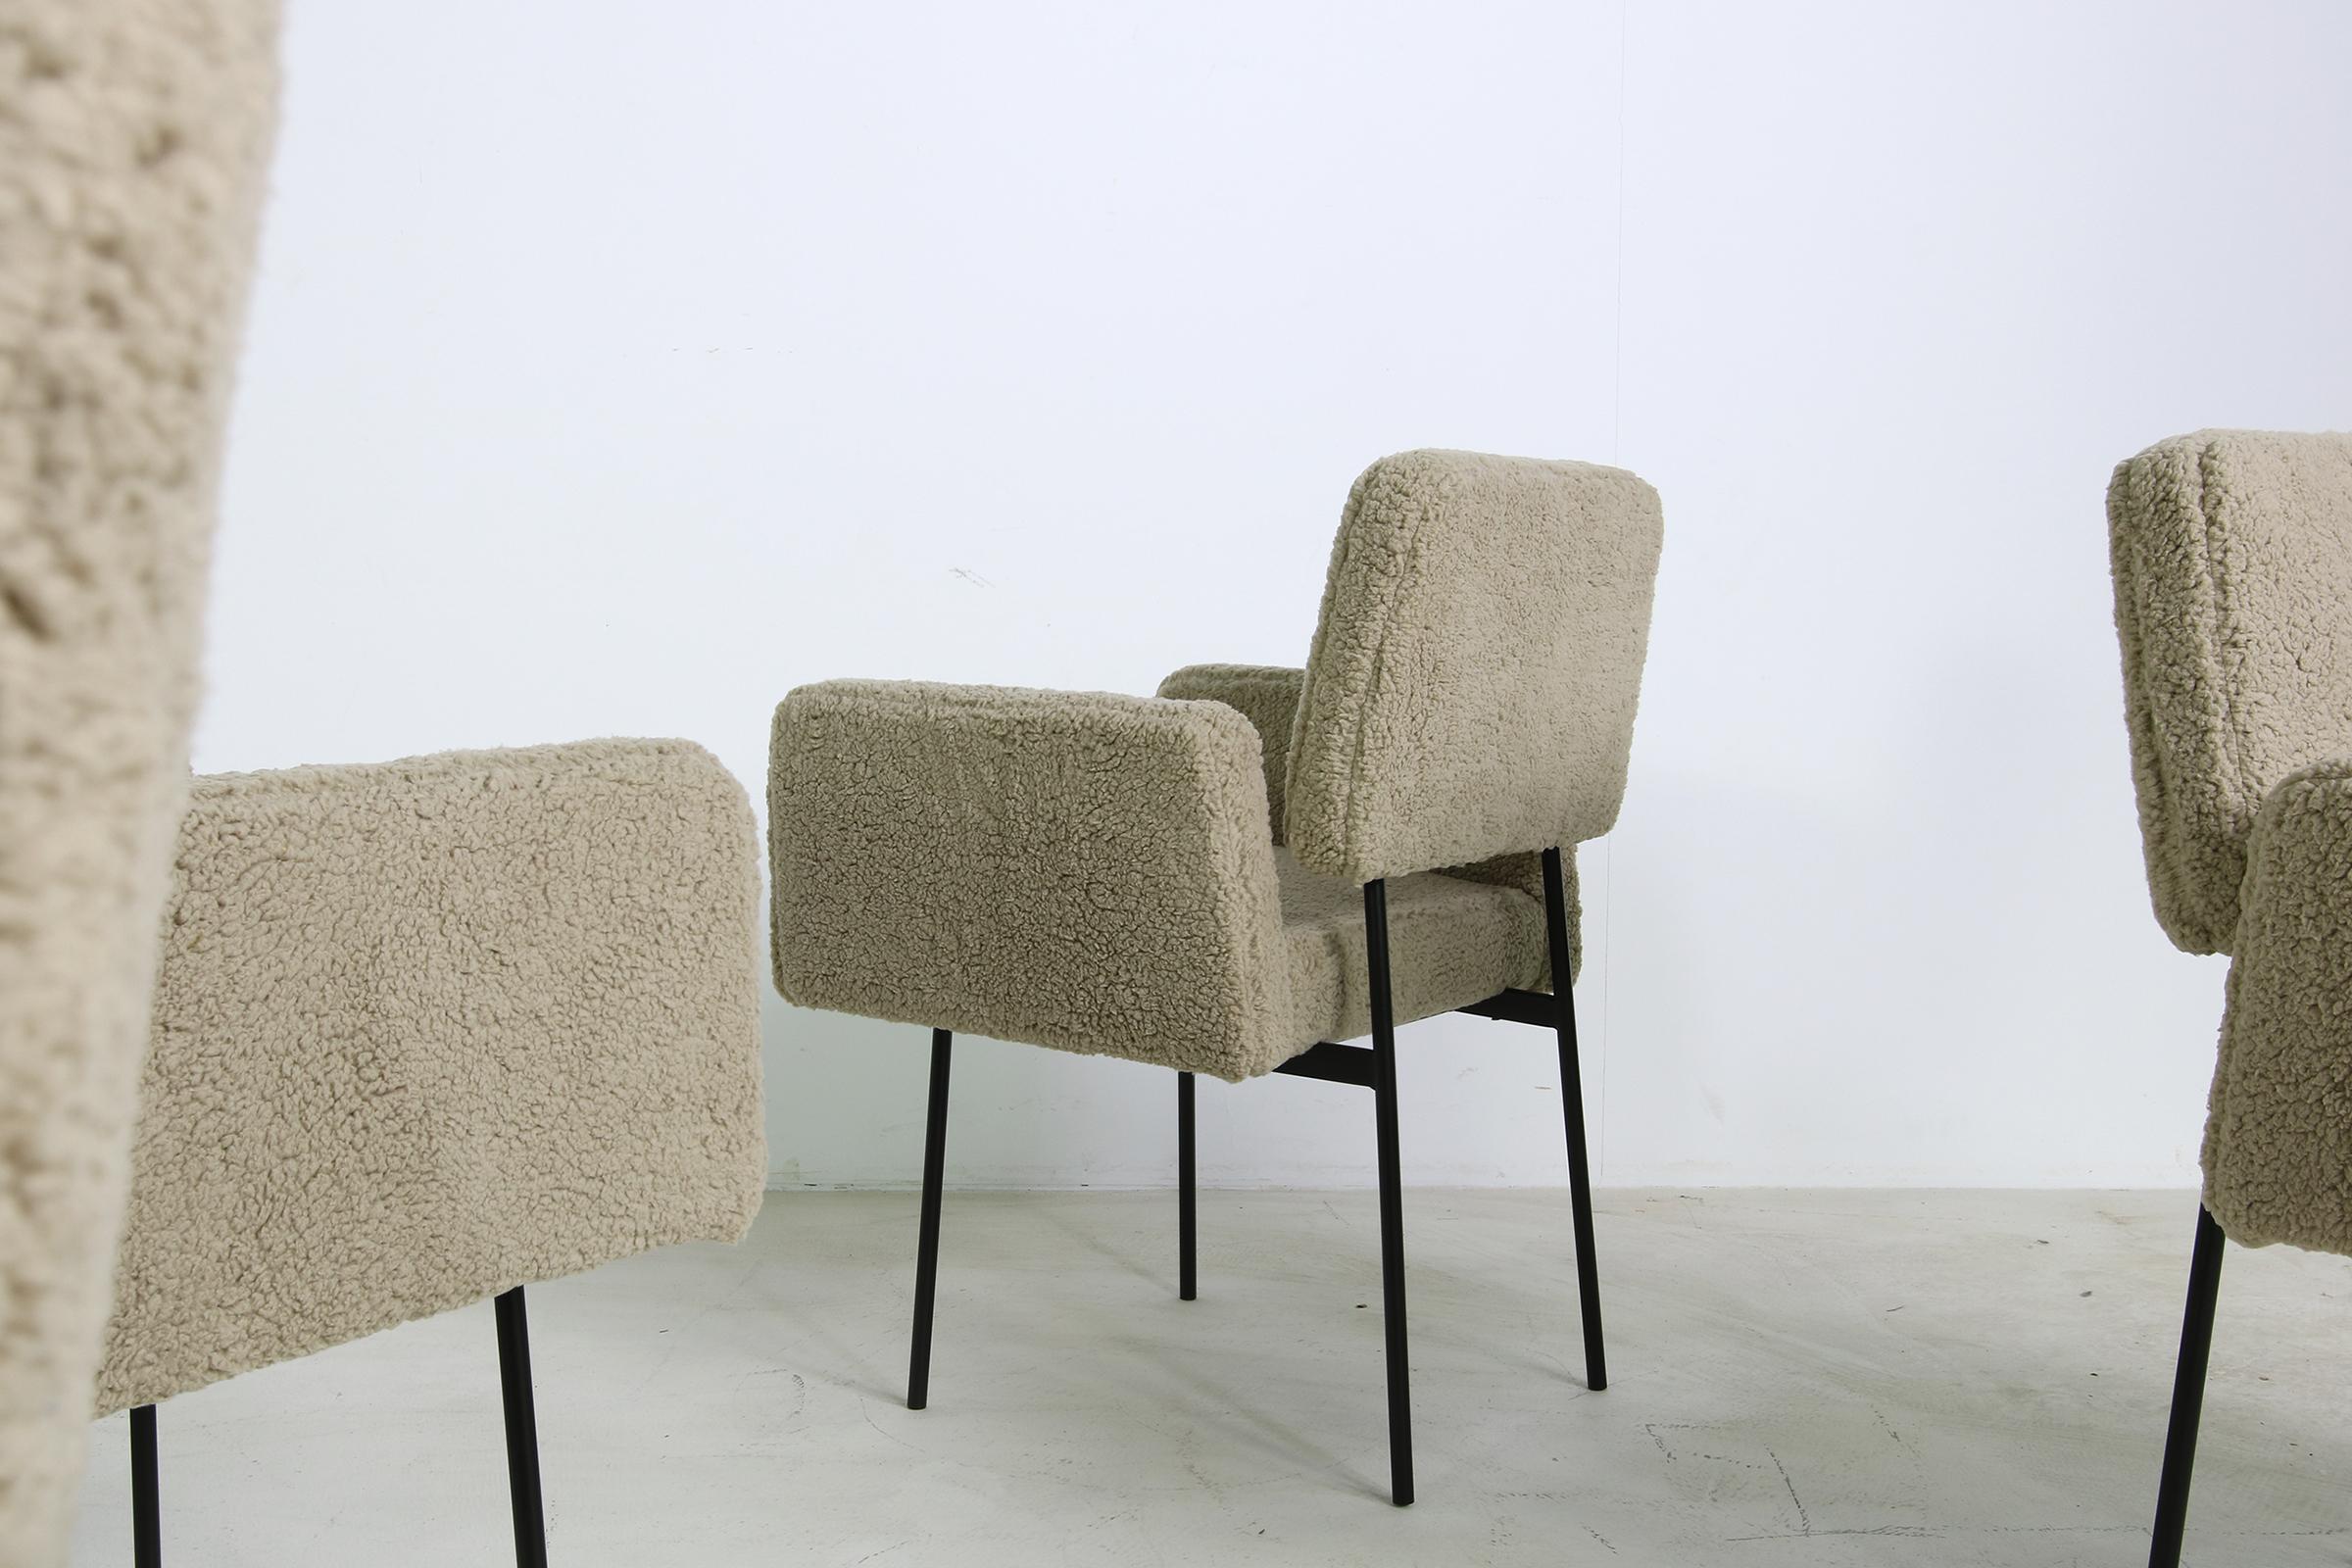 Beautiful modern armchair(s), designed by Nathan Lindberg. Unique design, it's a contemporary chair, with a vintage and Mid-Century Modern look, manufactured in the 'oldschool style' so no modern components, it's like directly from the 1950s-1960s.